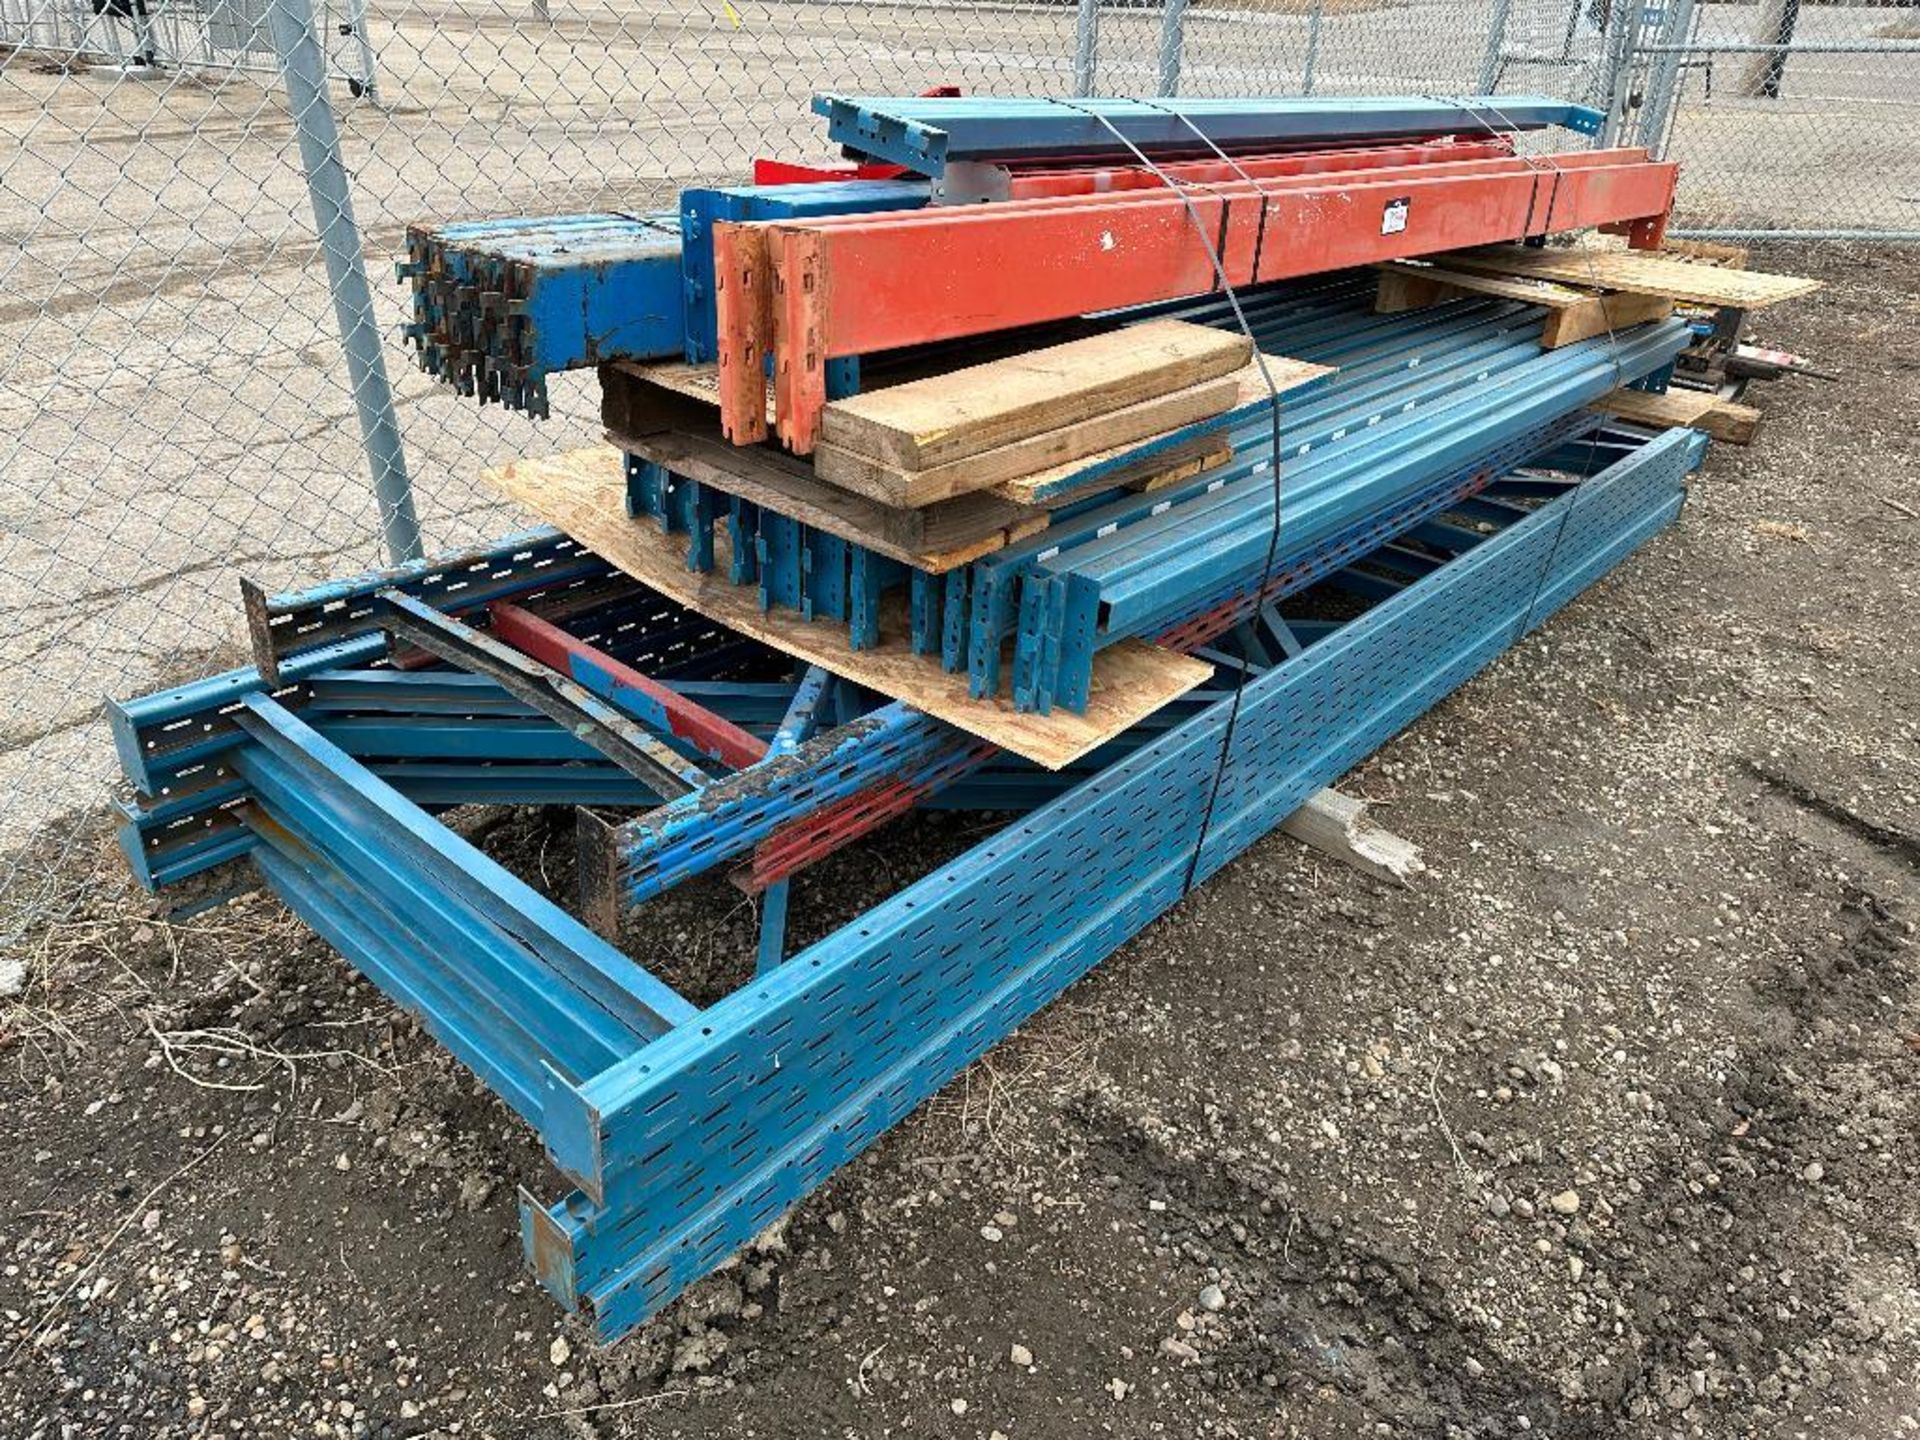 Lot of asst. Pallet Racking Frames and Beams - Various Sizes - Image 4 of 4